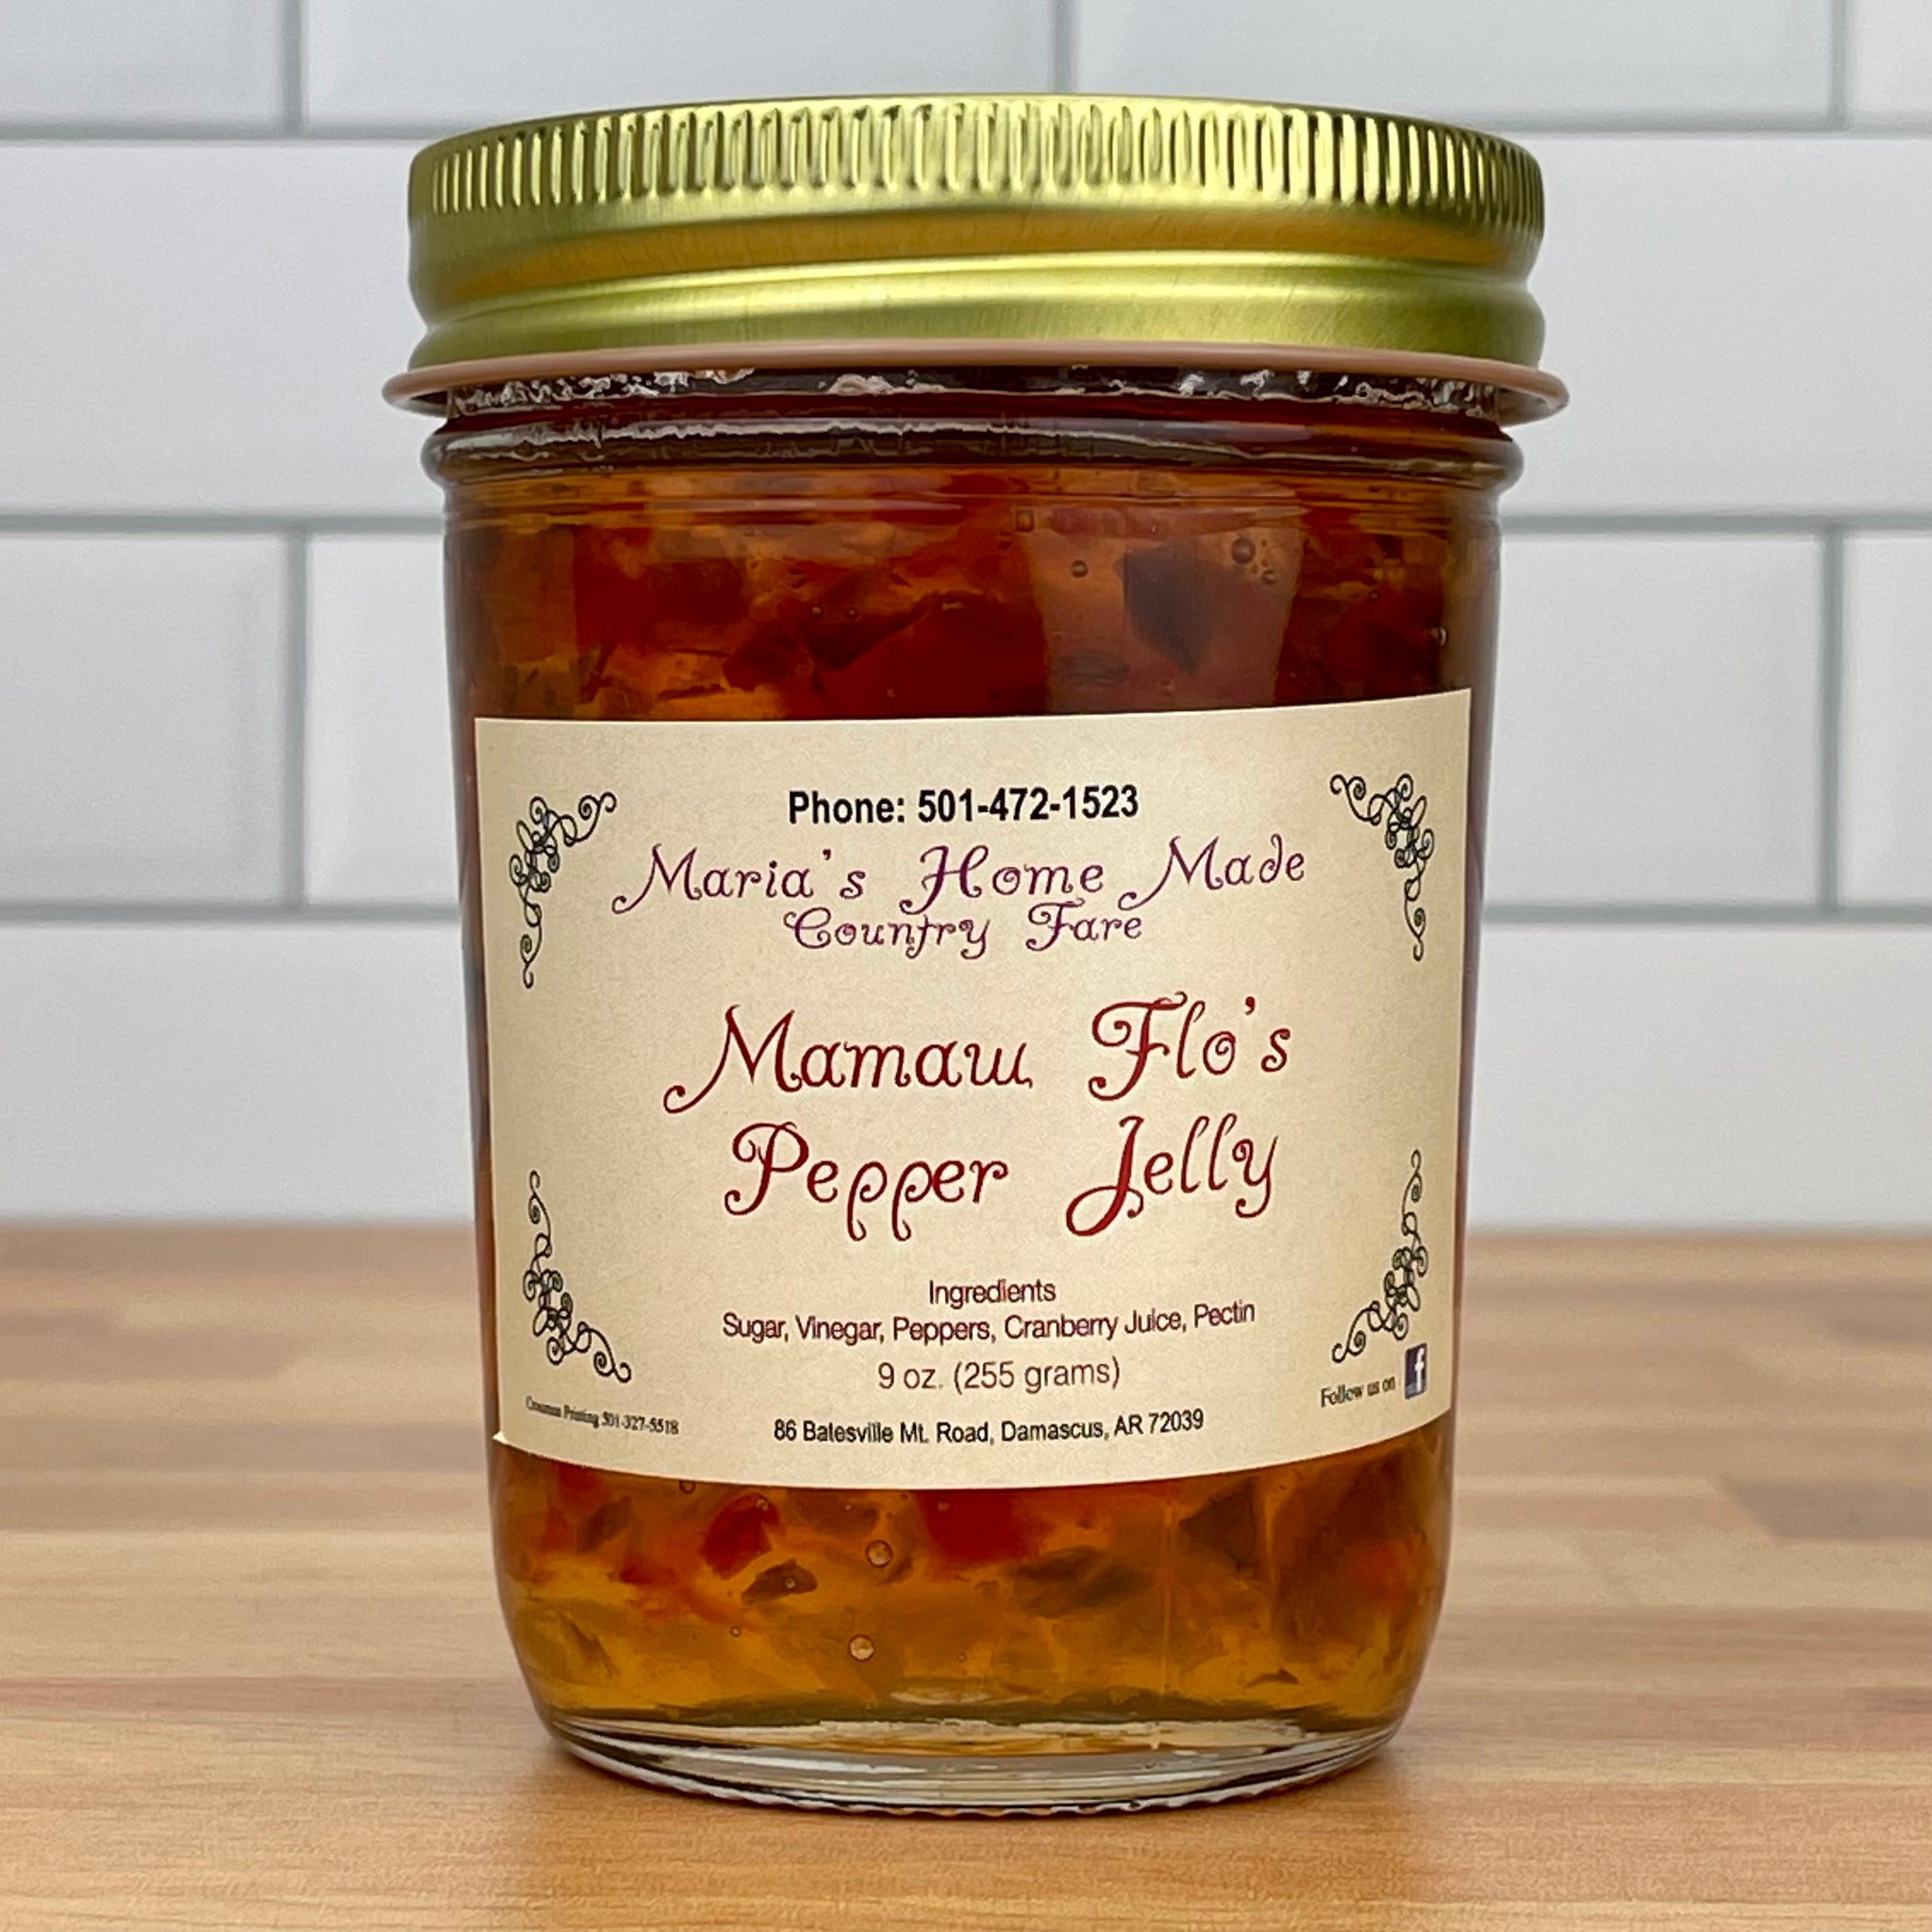 Jelly - Mamaw Flo’s Pepper